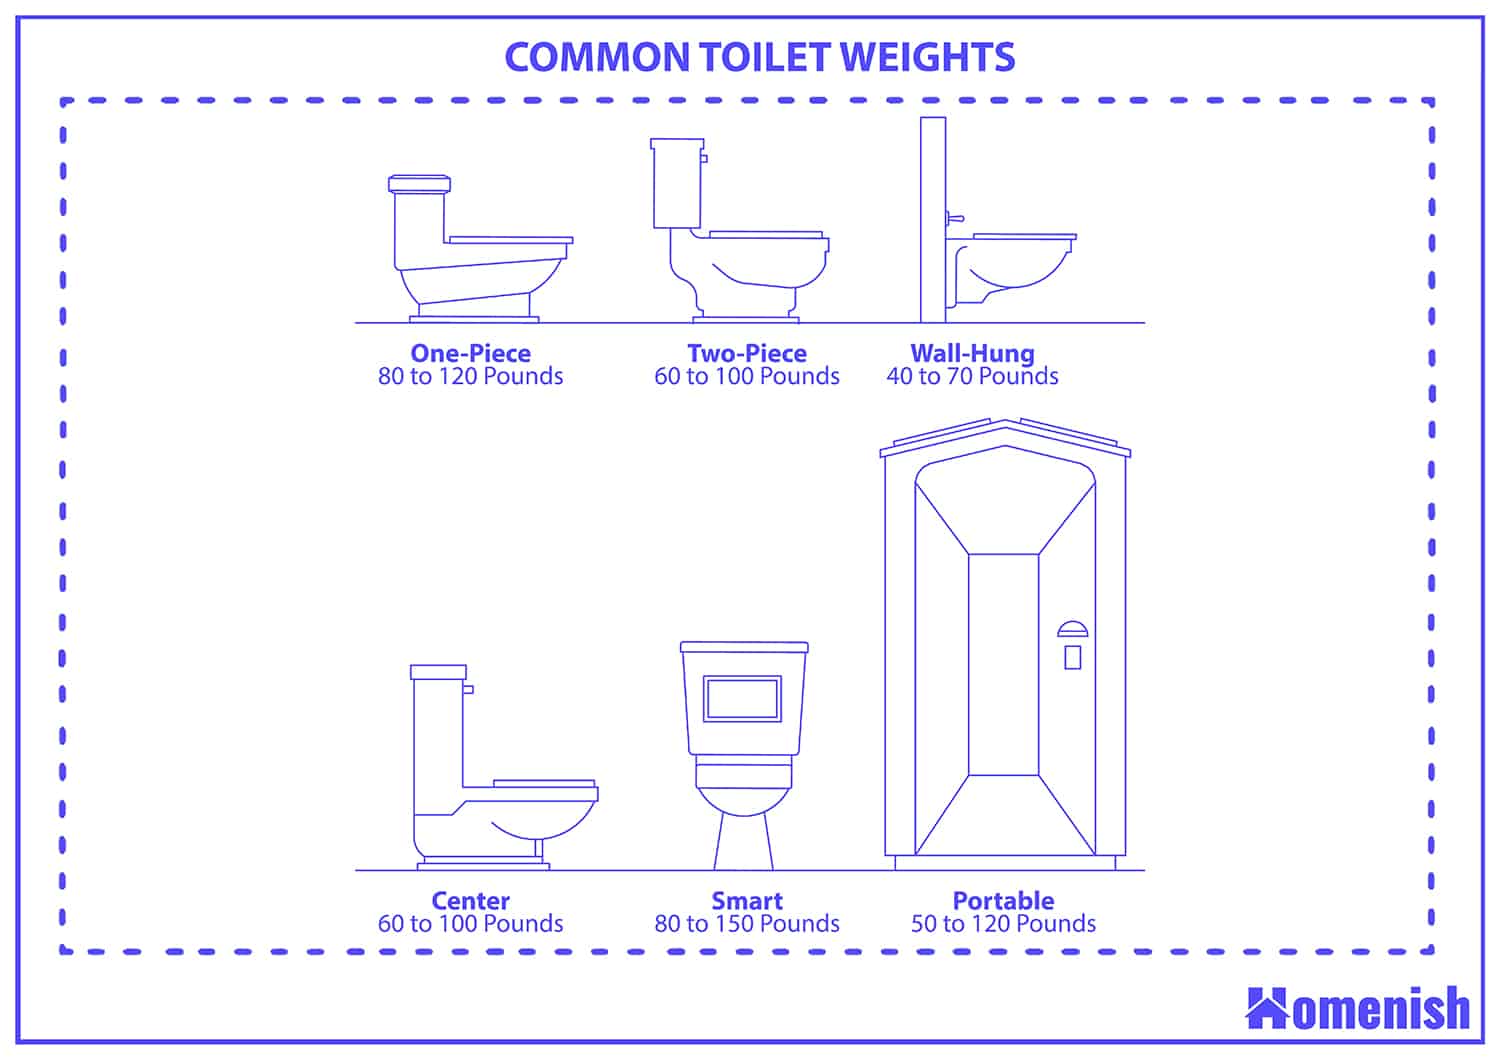 Common toilet weights